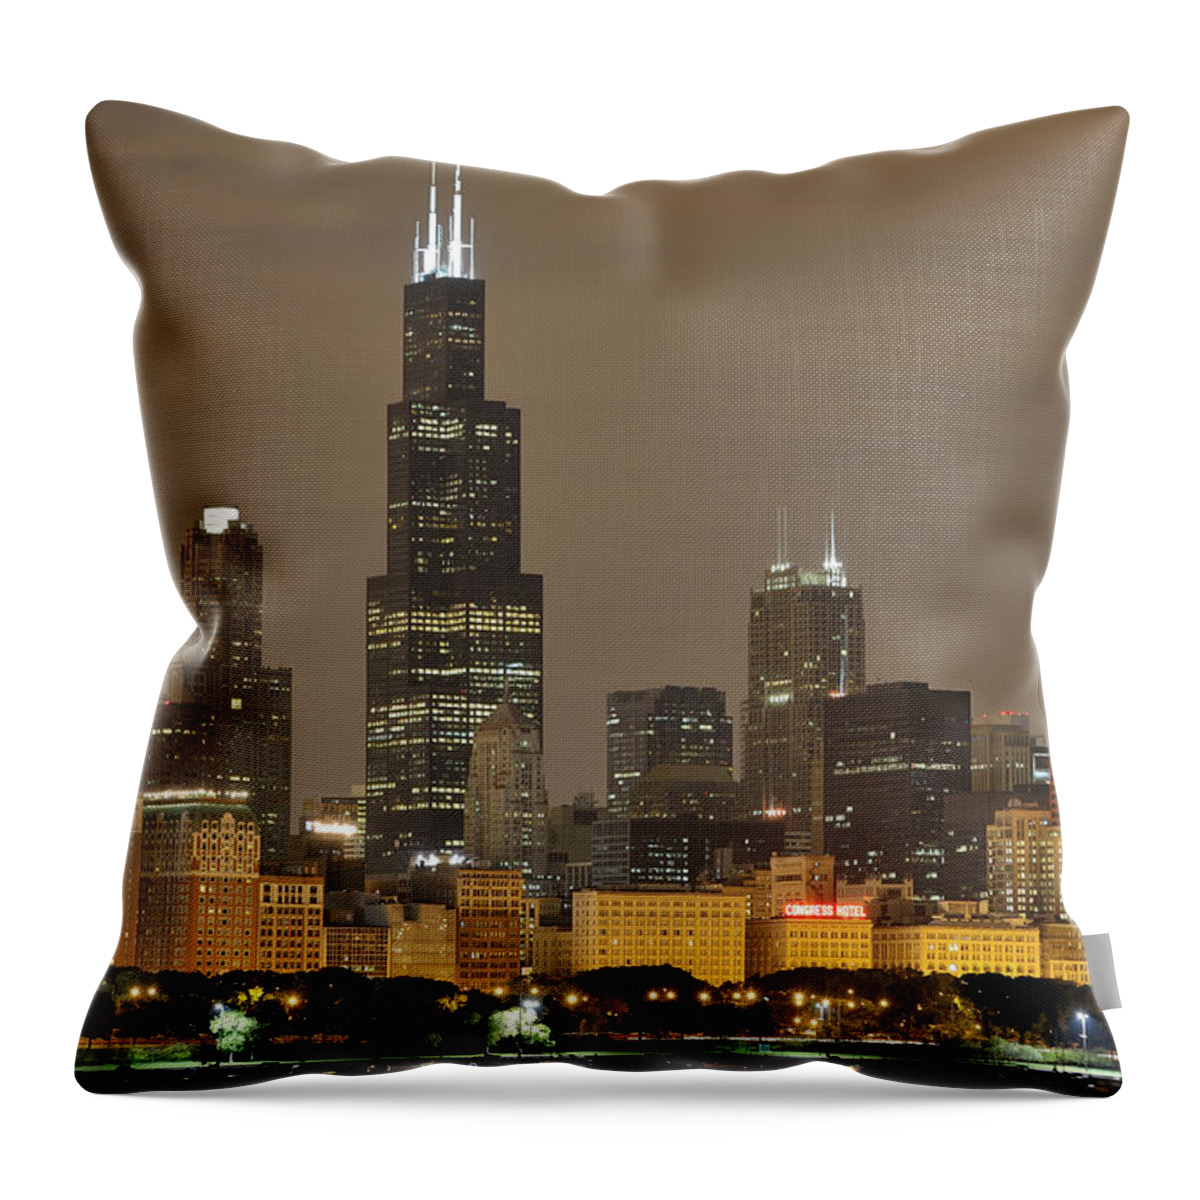 Chicago Skyline Throw Pillow featuring the photograph Chicago Skyline at Night by Sebastian Musial